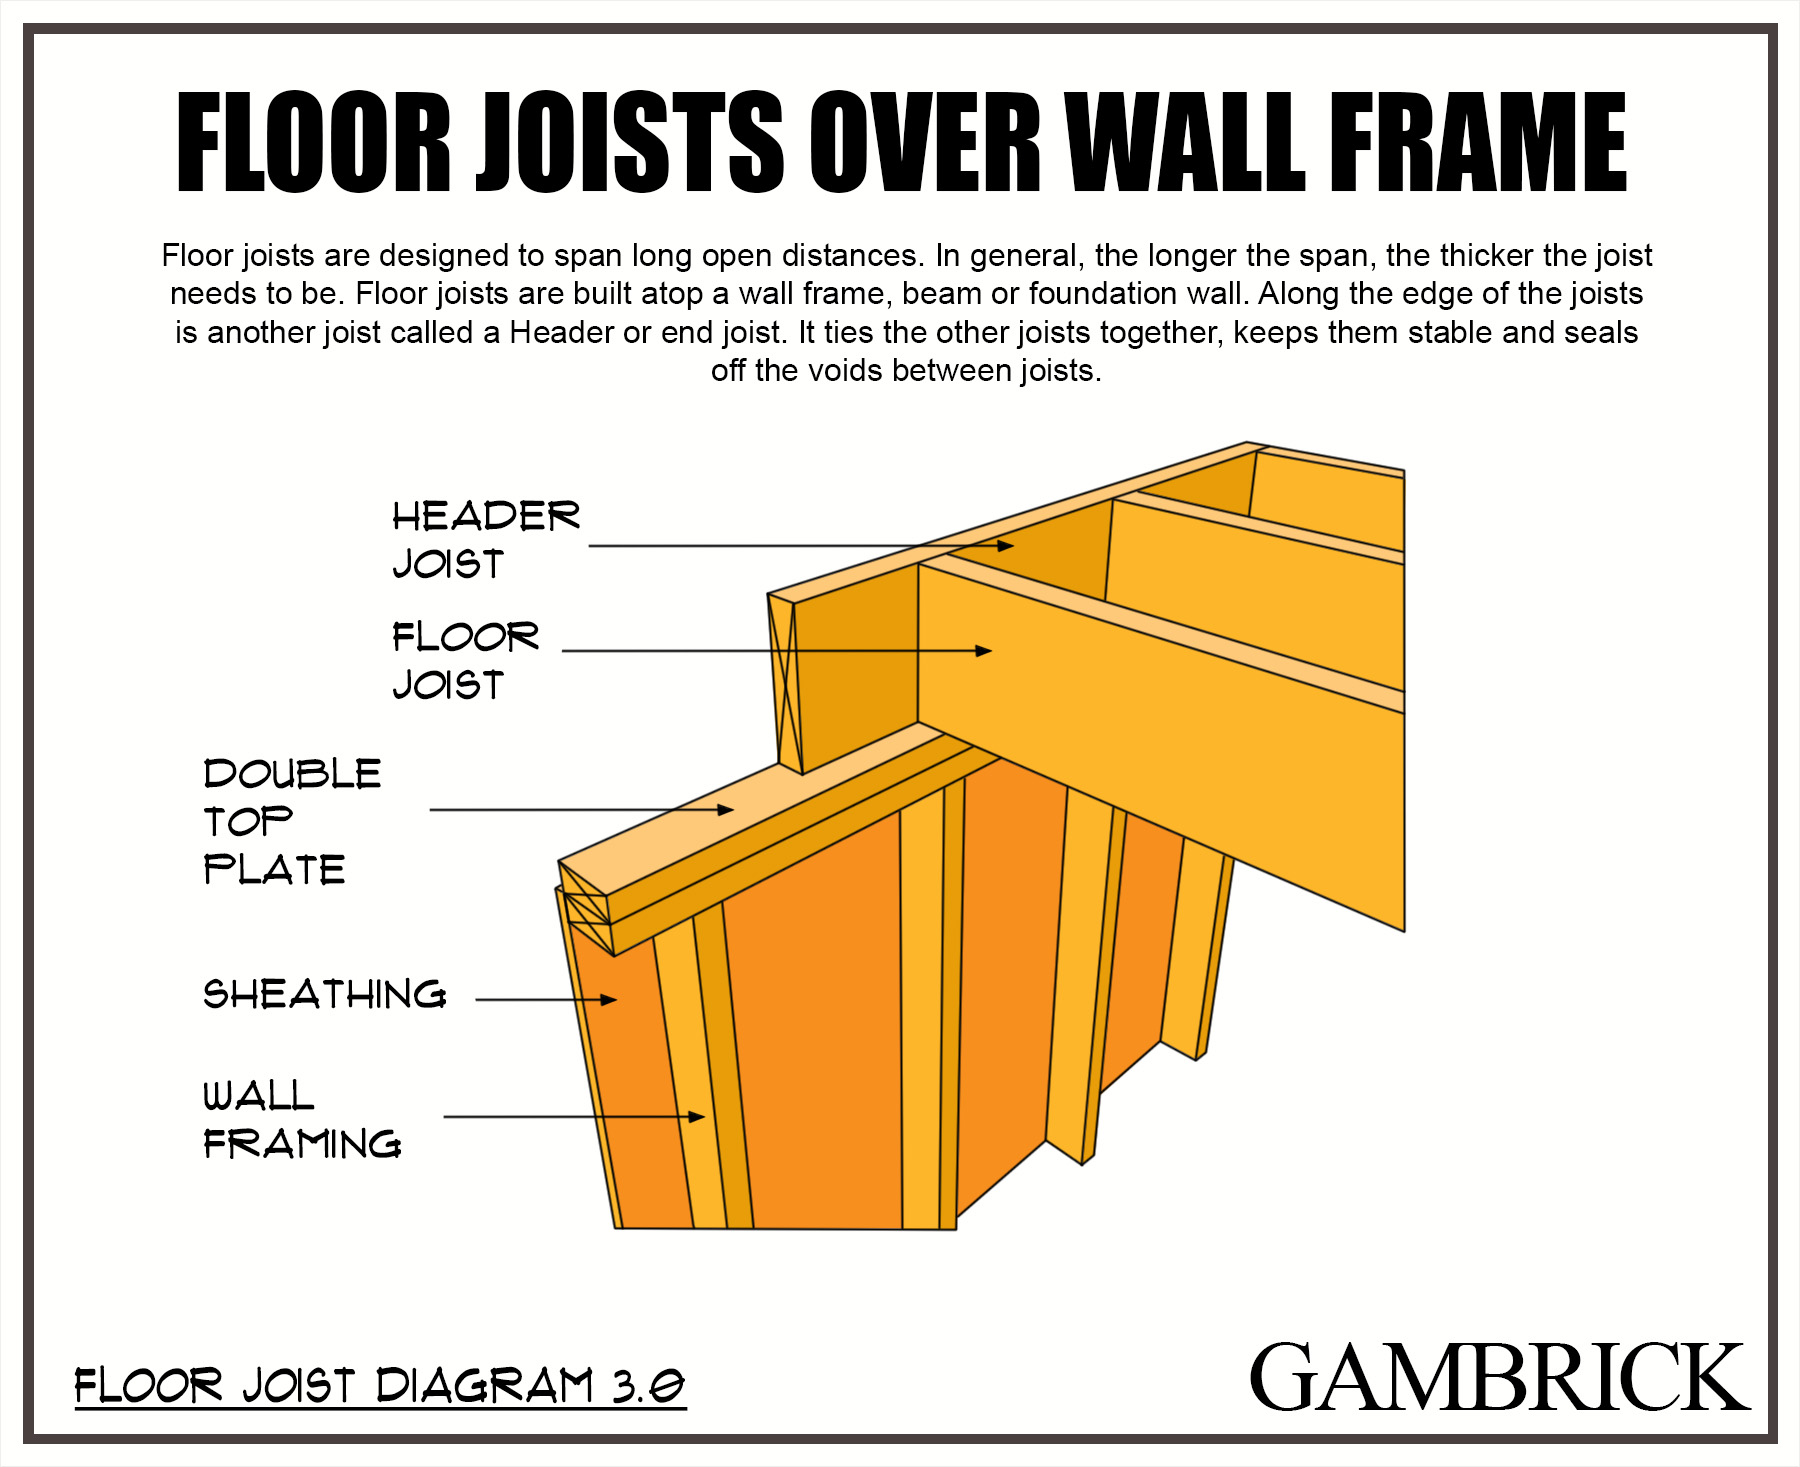 what is a floor joist drawing 2.0